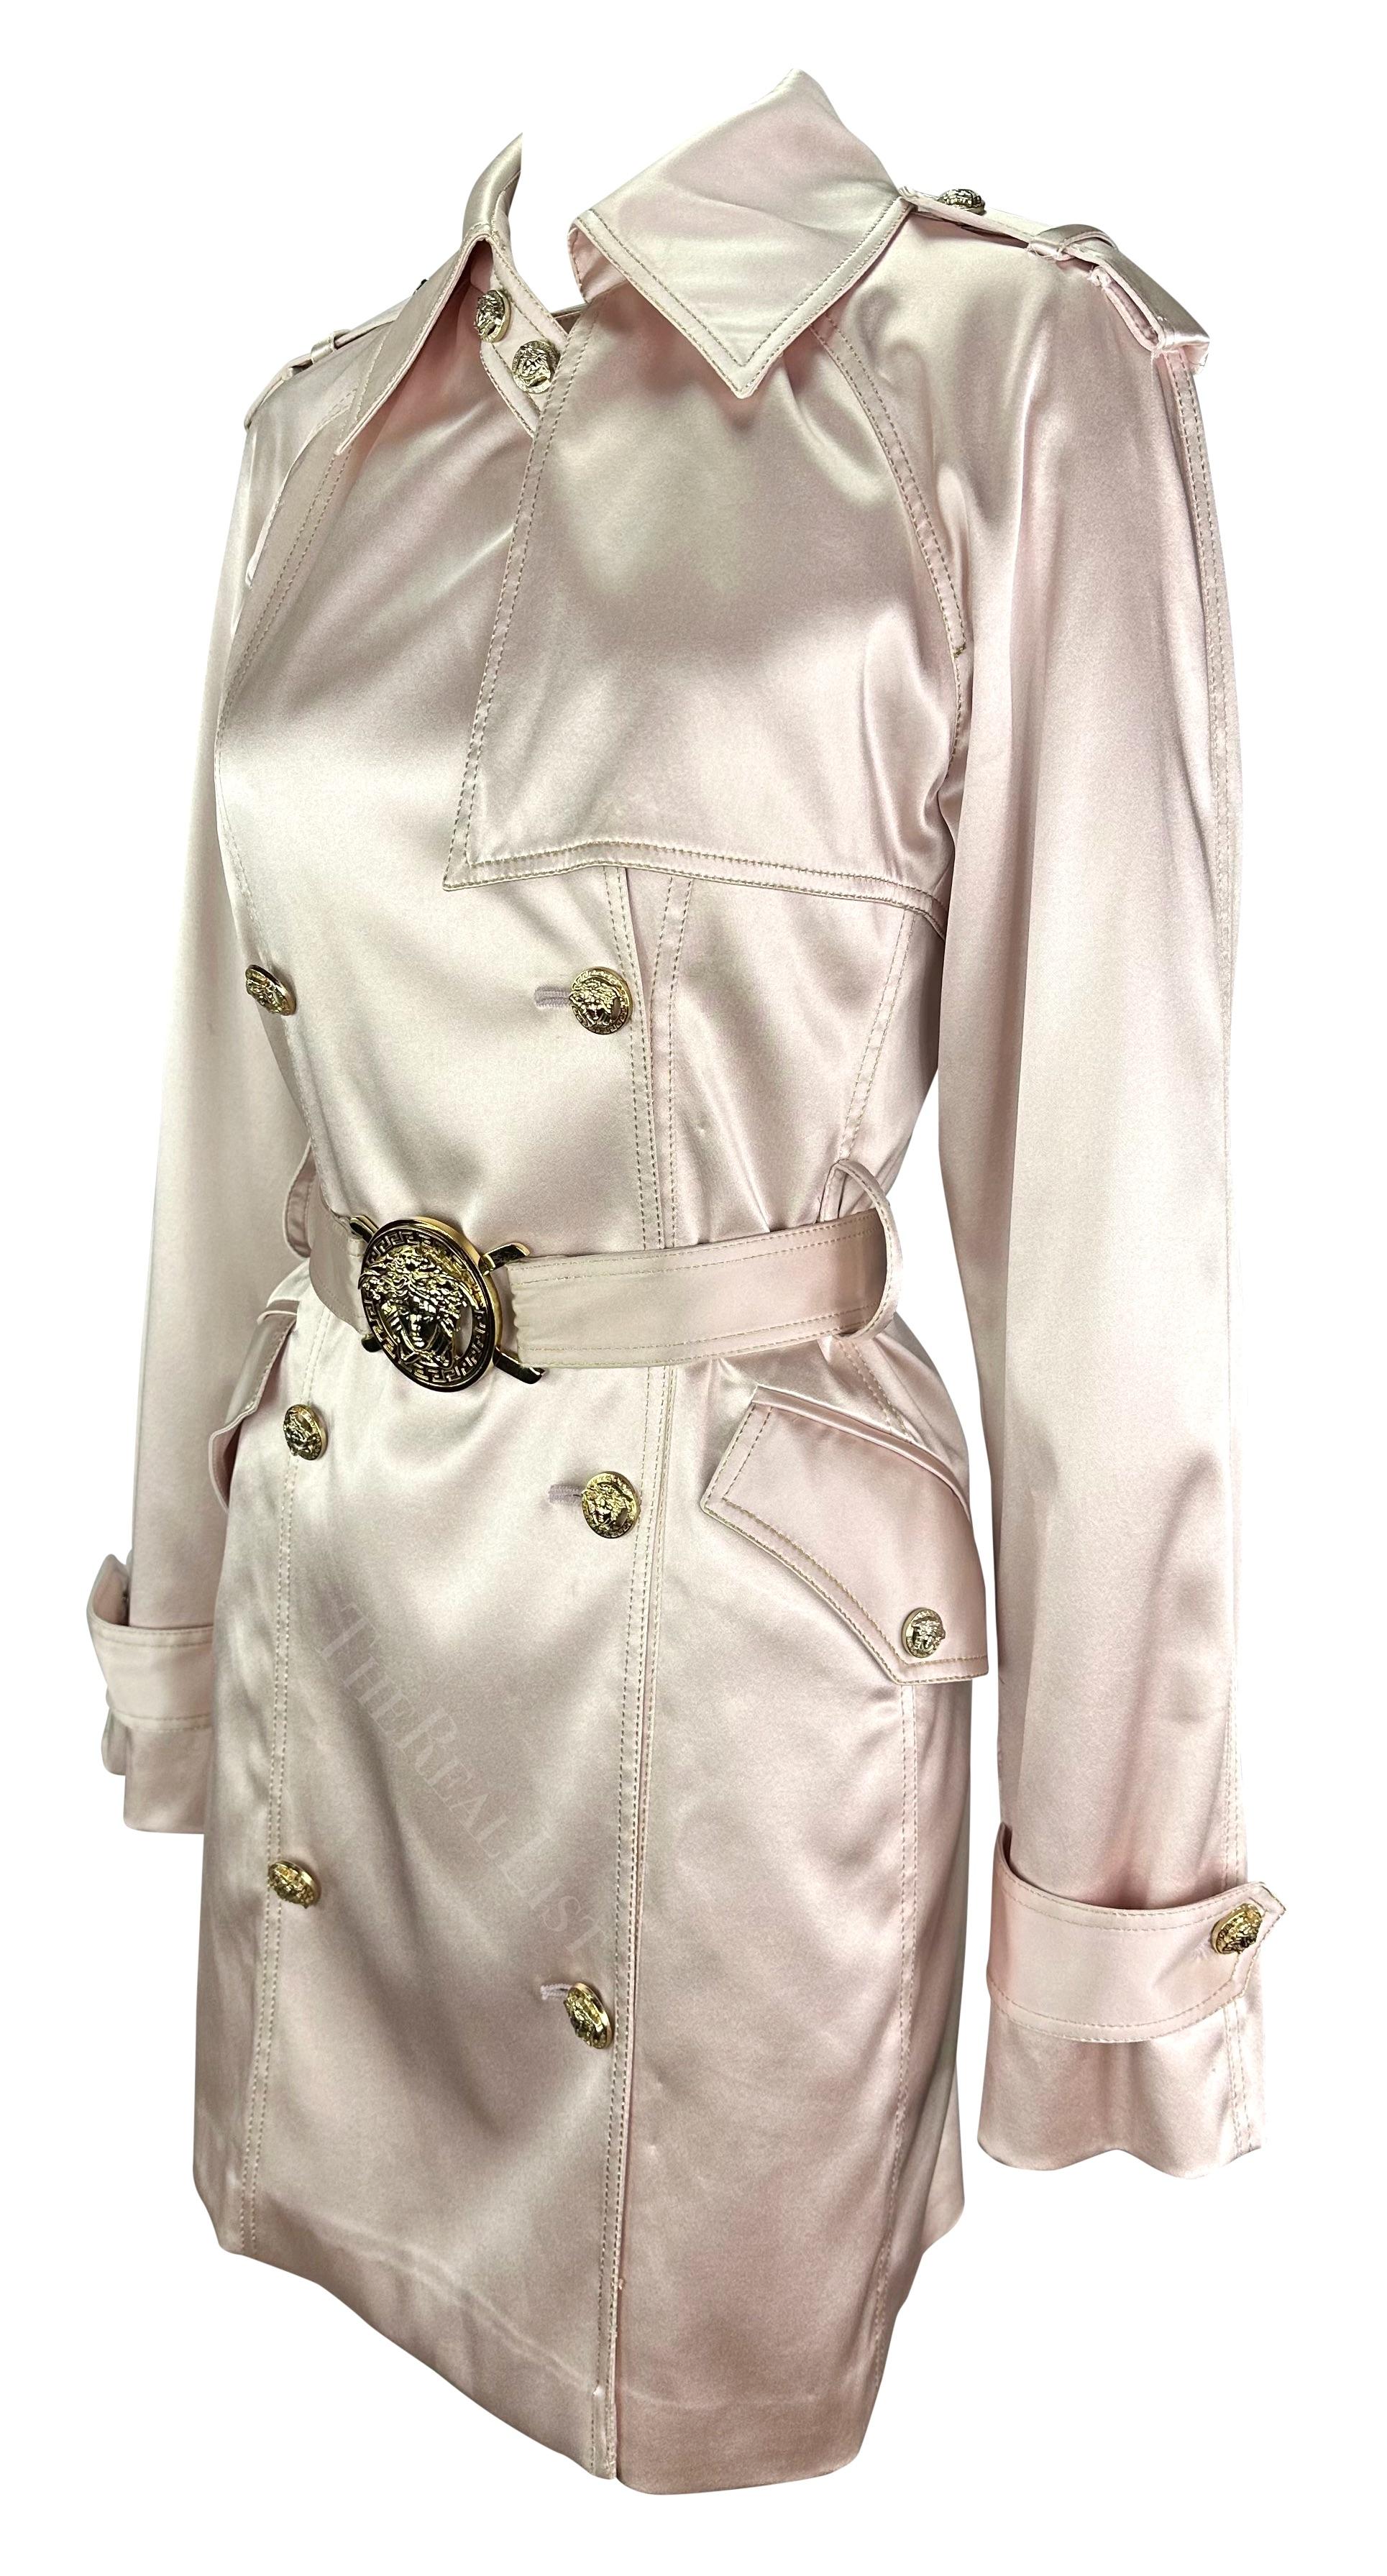 S/S 2005 Versace by Donatella Pale Pink Satin Gold Medusa Medallion Sample Coat In Excellent Condition For Sale In West Hollywood, CA